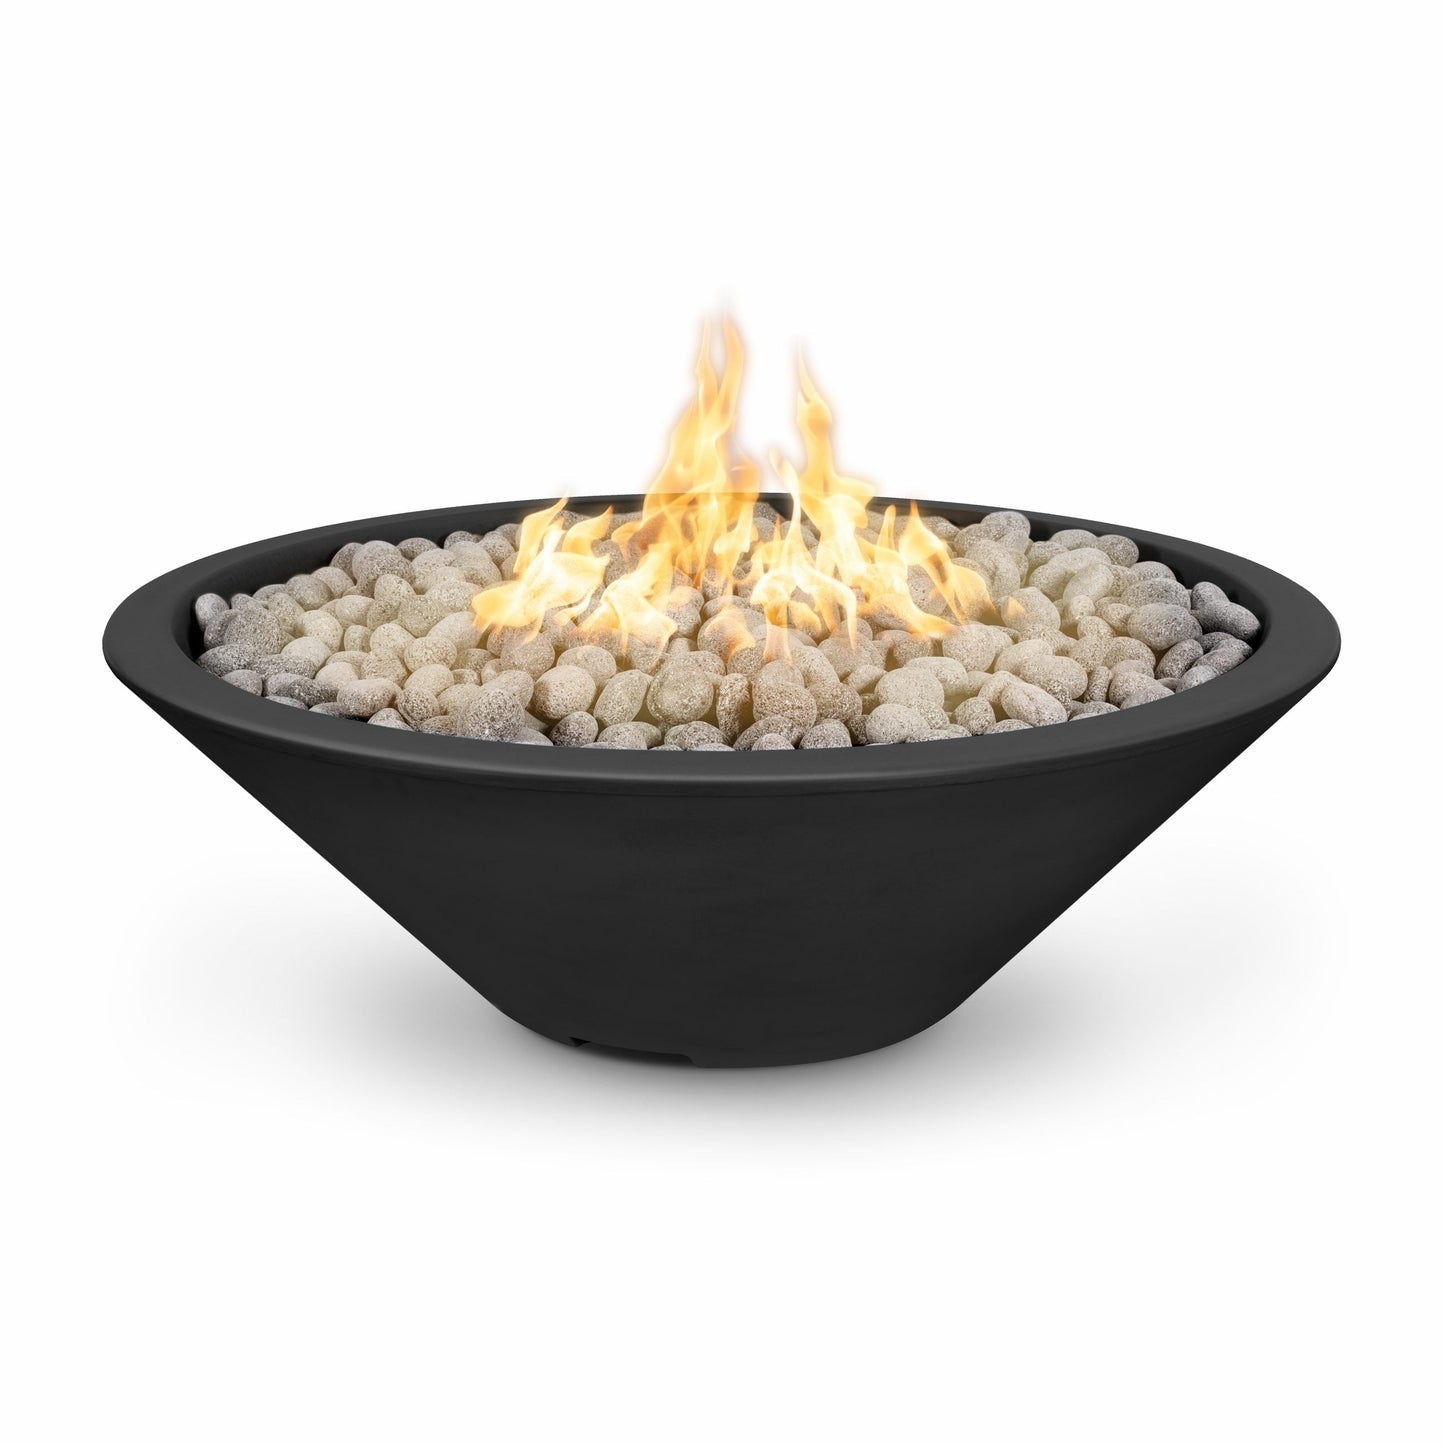 The Outdoor Plus Round Cazo 48" Gray Powder Coated Metal Liquid Propane Fire Pit with Match Lit with Flame Sense Ignition